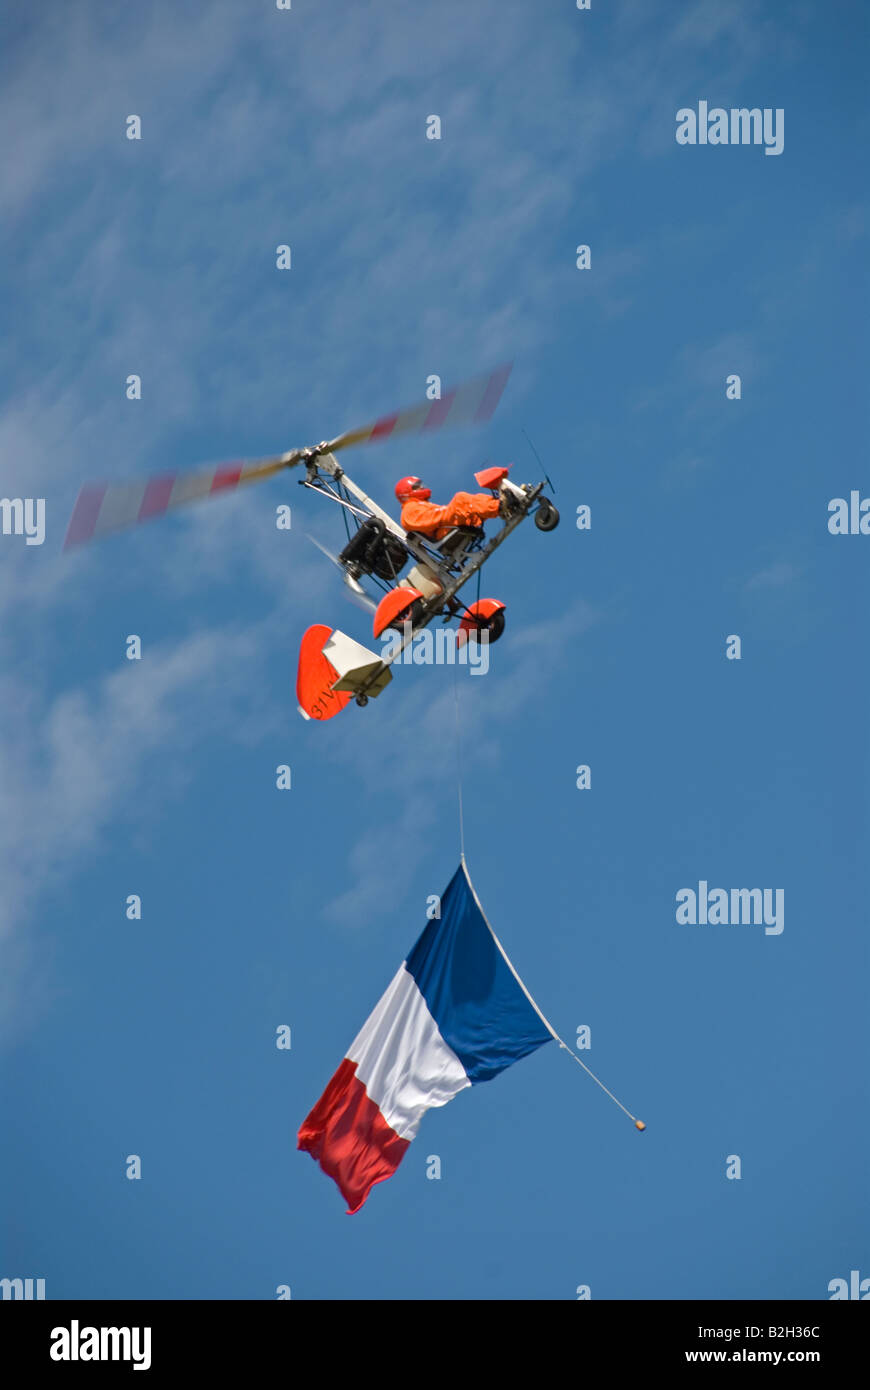 Stock photo of a single autogyro with the french flag flying beneath it Stock Photo